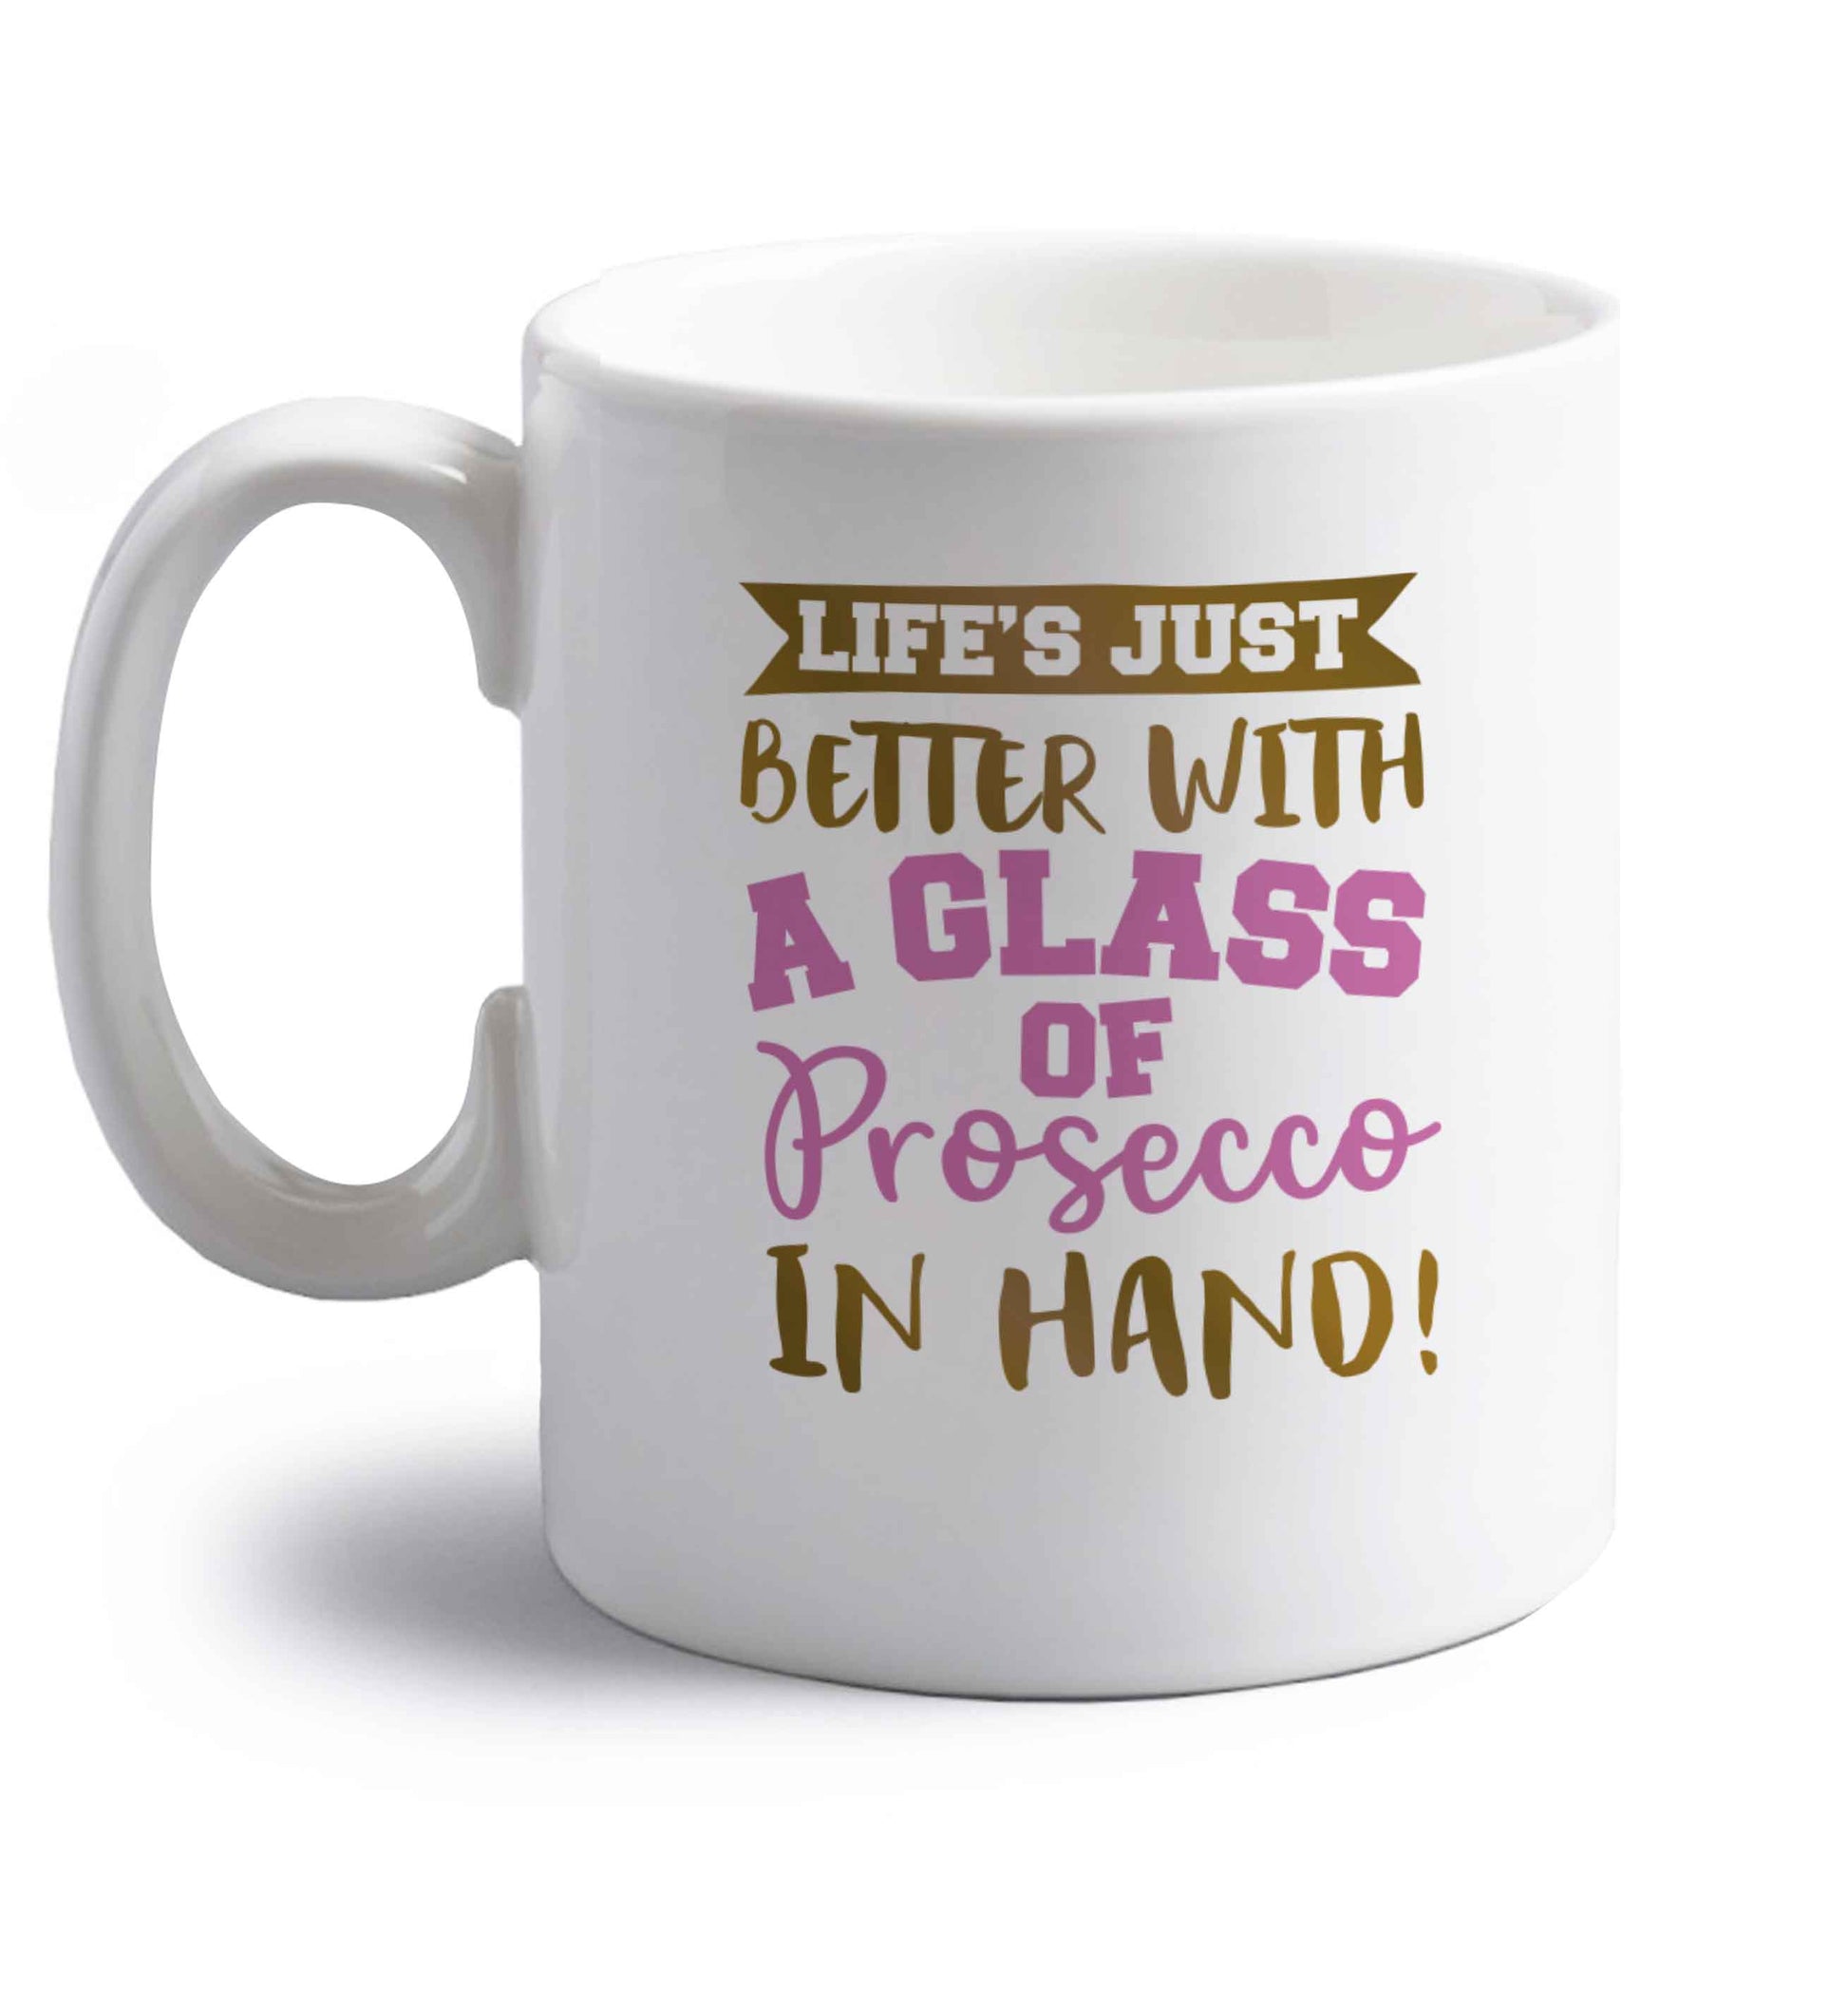 Life's just better with a glass of prosecco in hand right handed white ceramic mug 